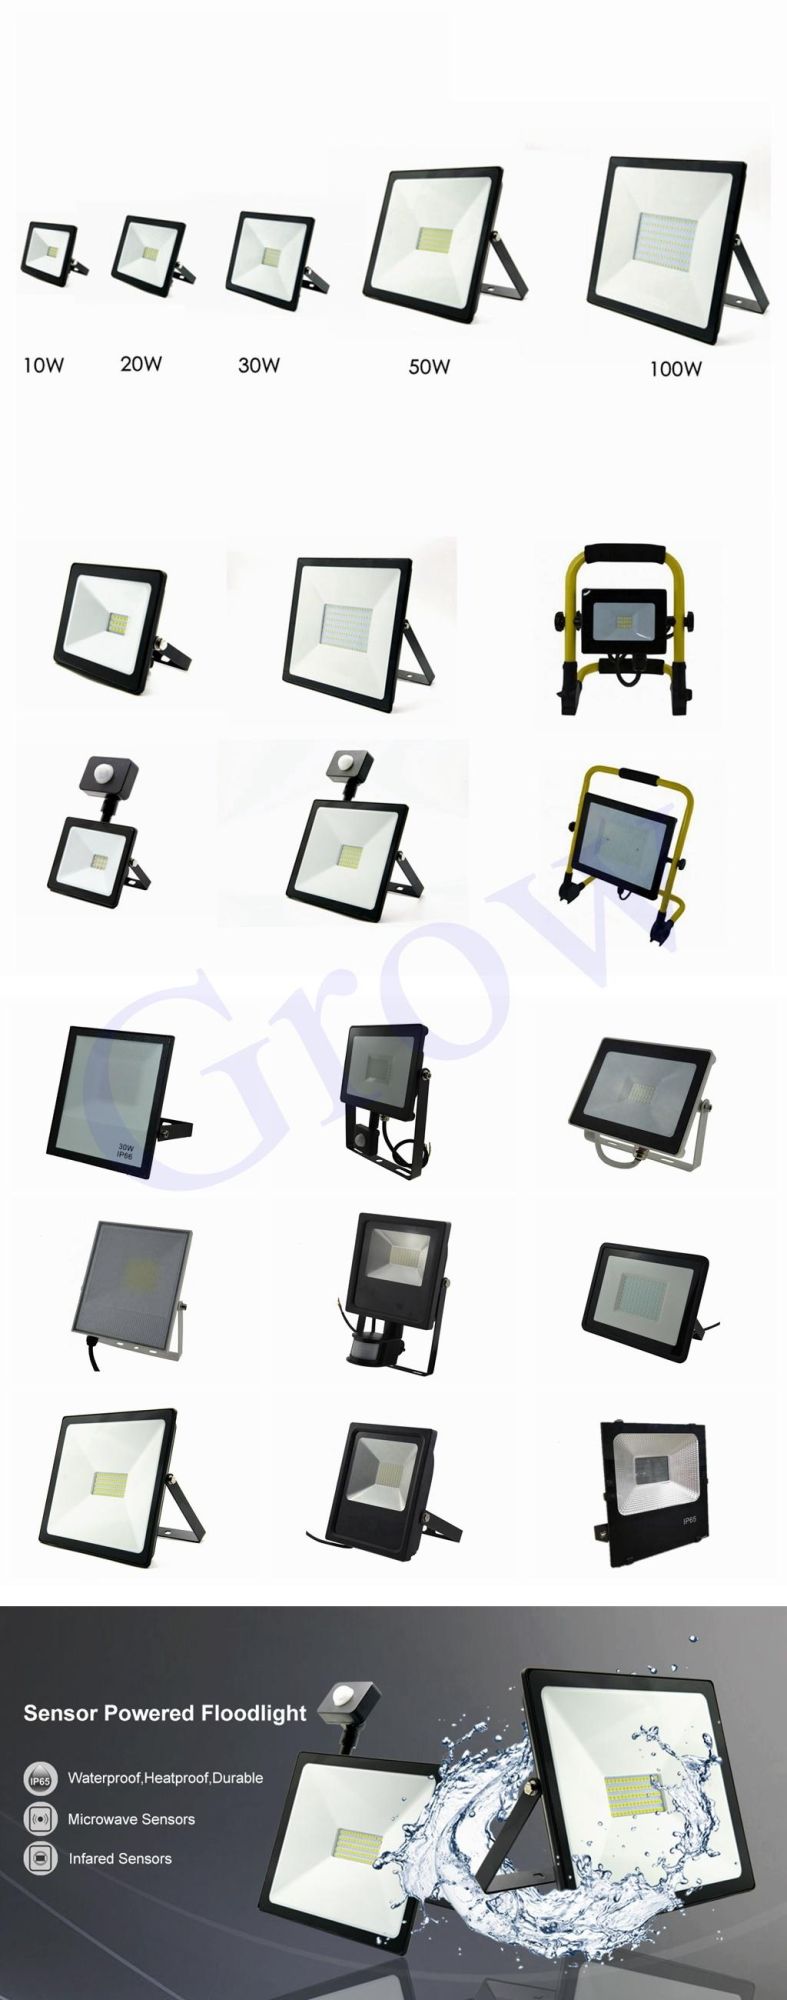 LED Flood Light 50W Rechargeable and Portable LED Floodlight for Outdoor Lighting